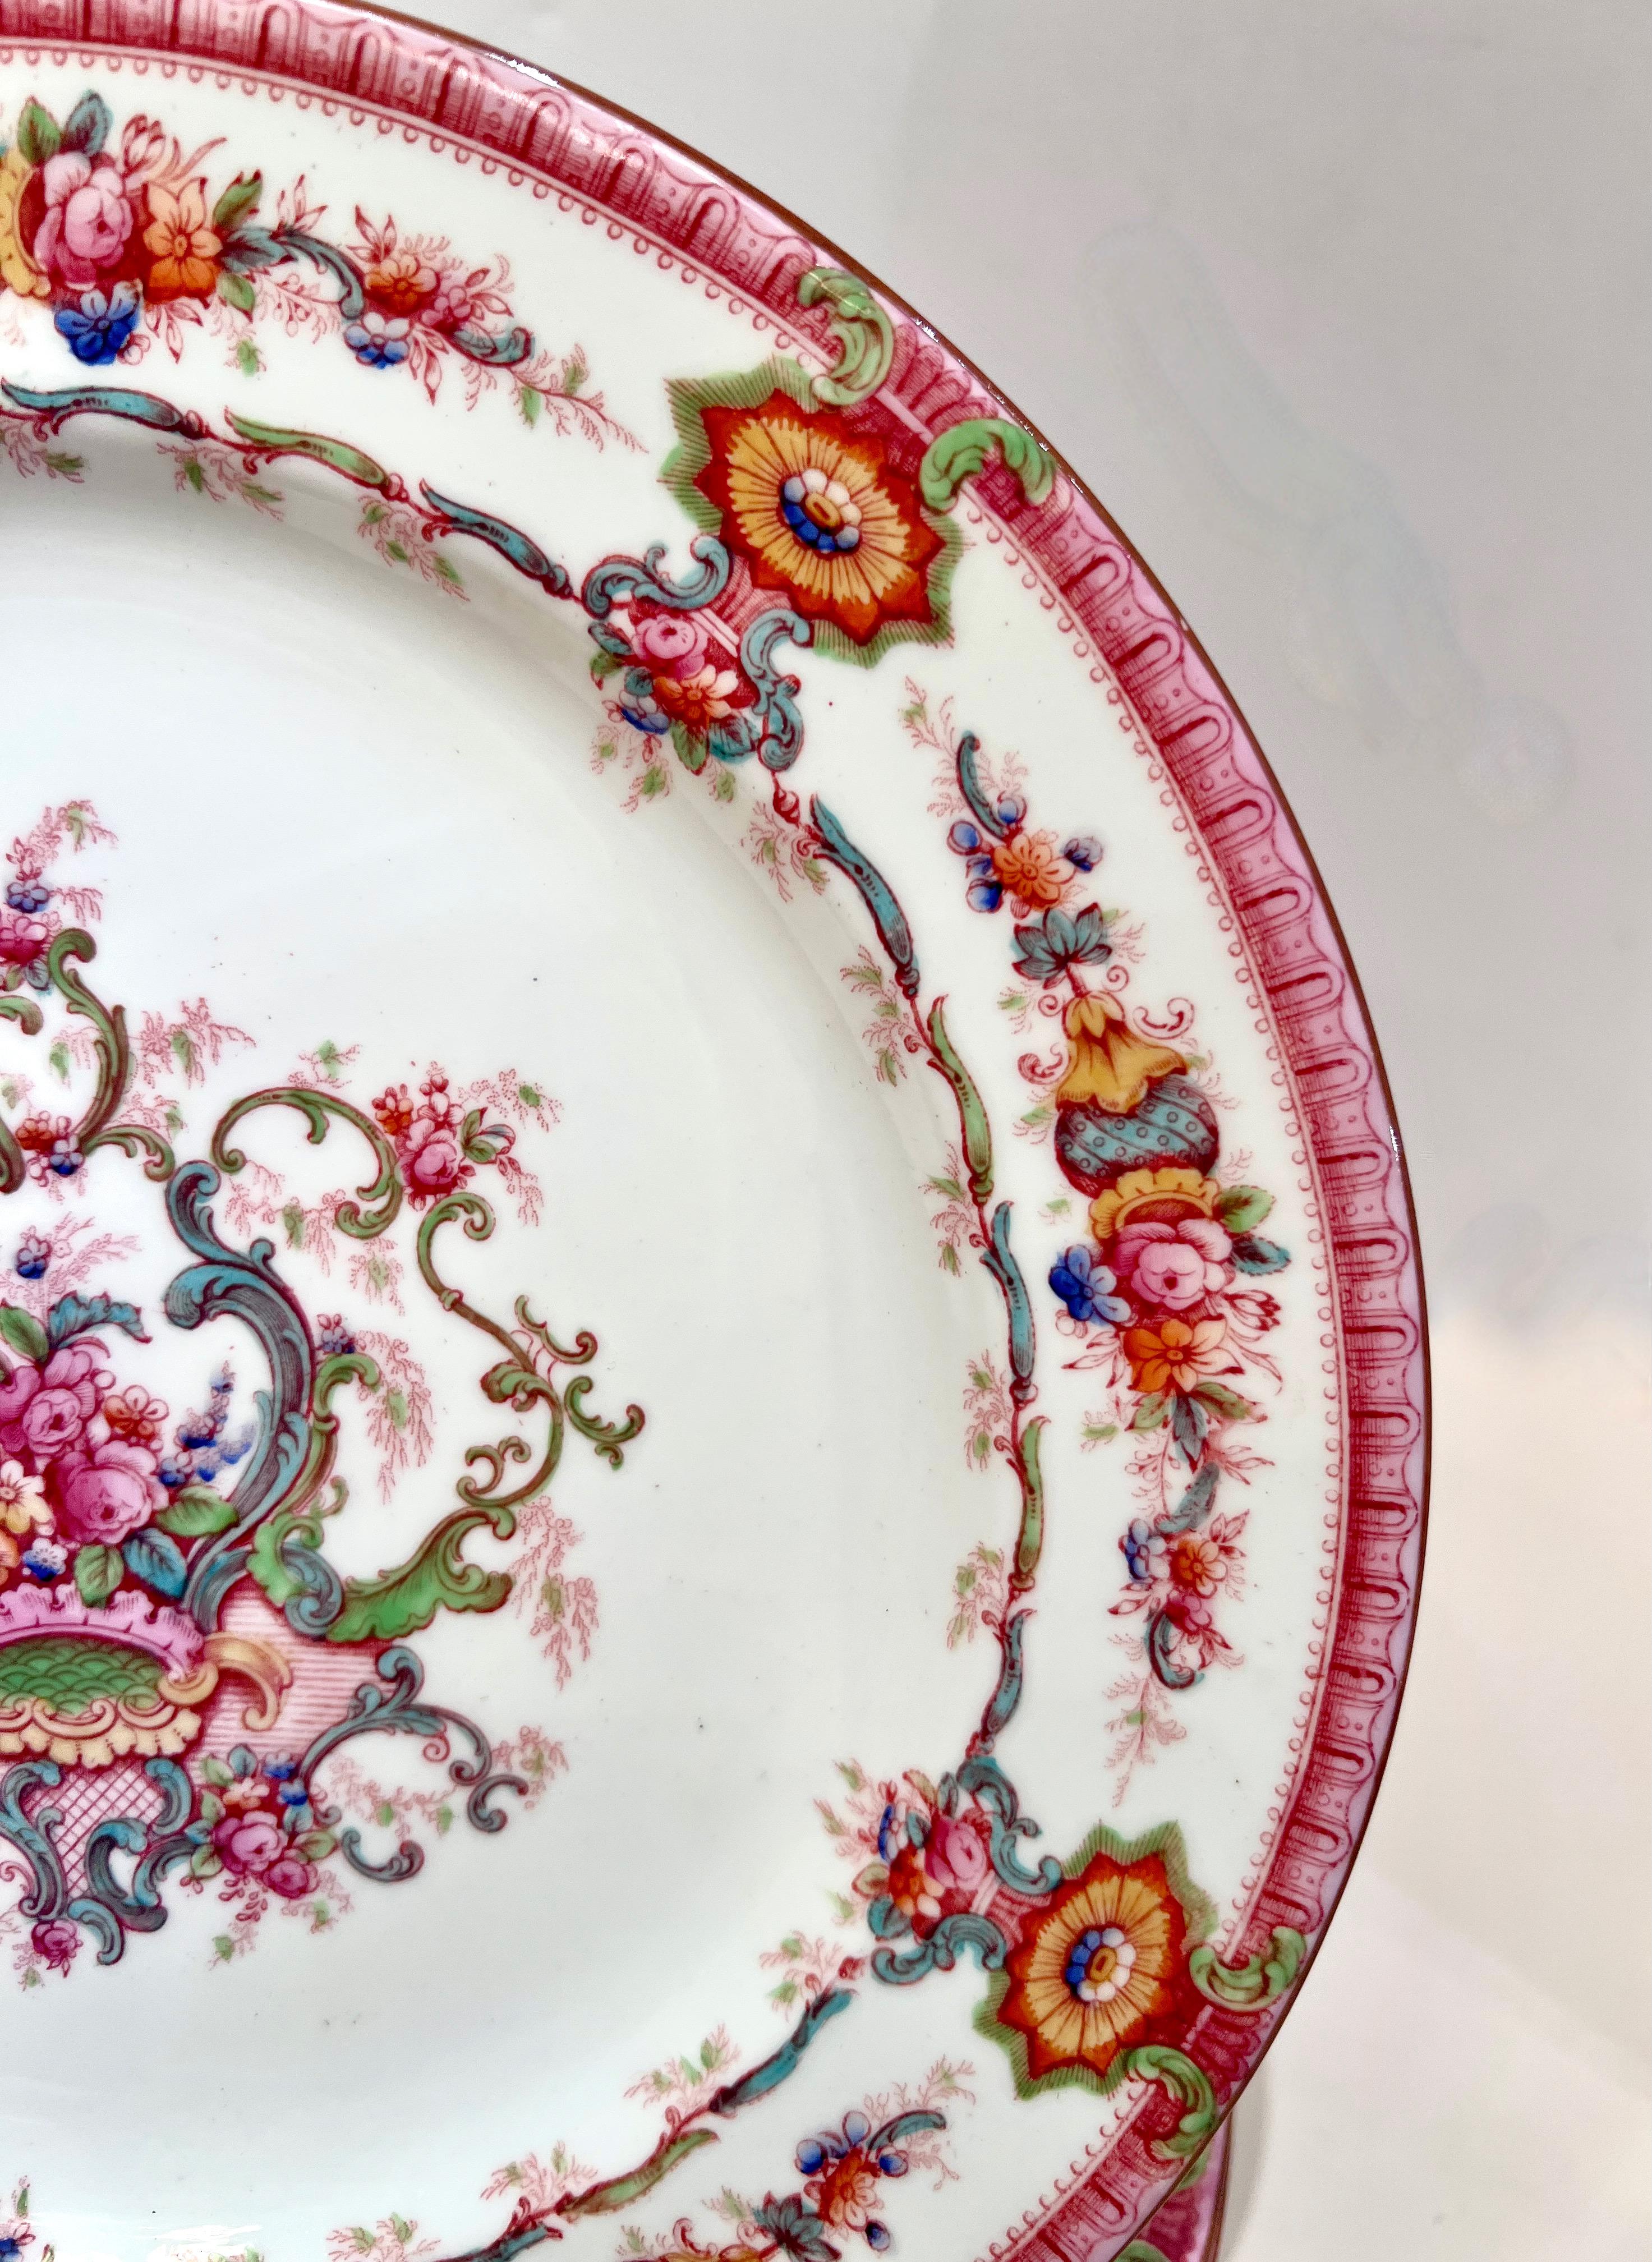 This is a beautifully decorated set of 12 Cauldon dinner plates that date to the first half of the 20th century. All of the plates are in very good condition and are ready for your next dinner party. The rims of the plates are decorated with 5